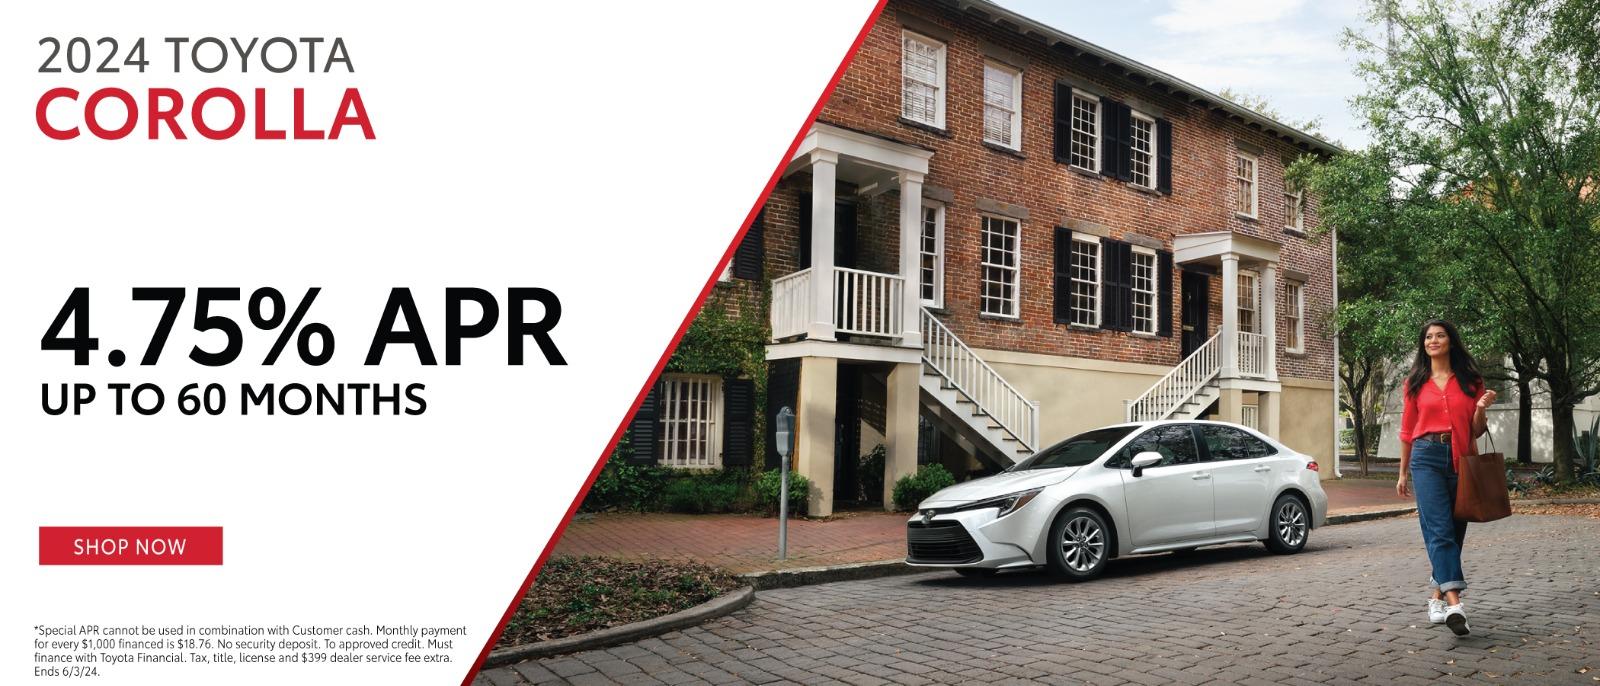 2024 Toyota Corolla 4.75% APR up to 60 months